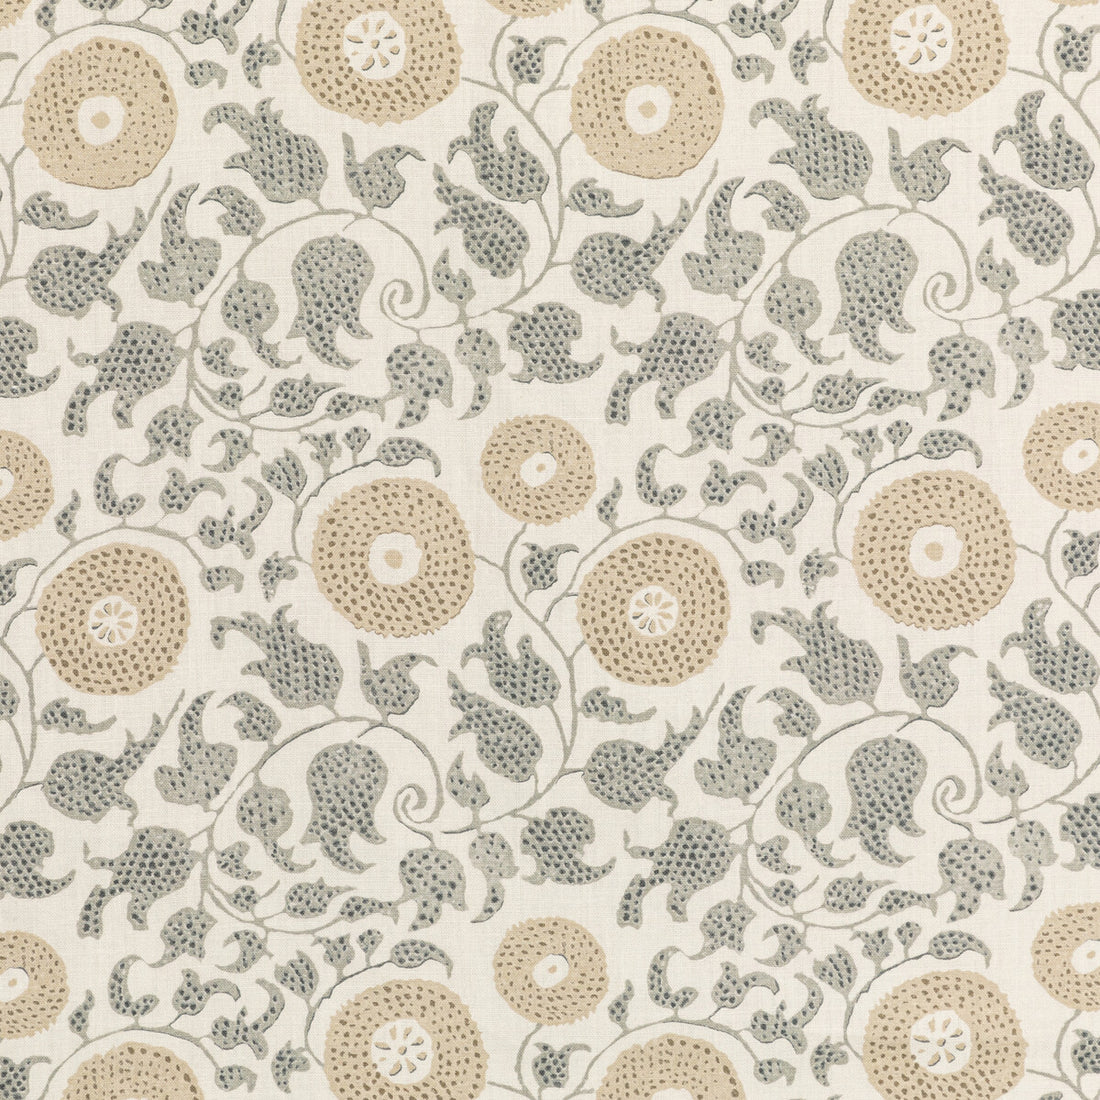 Eldora Print fabric in flax color - pattern 2020204.1611.0 - by Lee Jofa in the Breckenridge collection